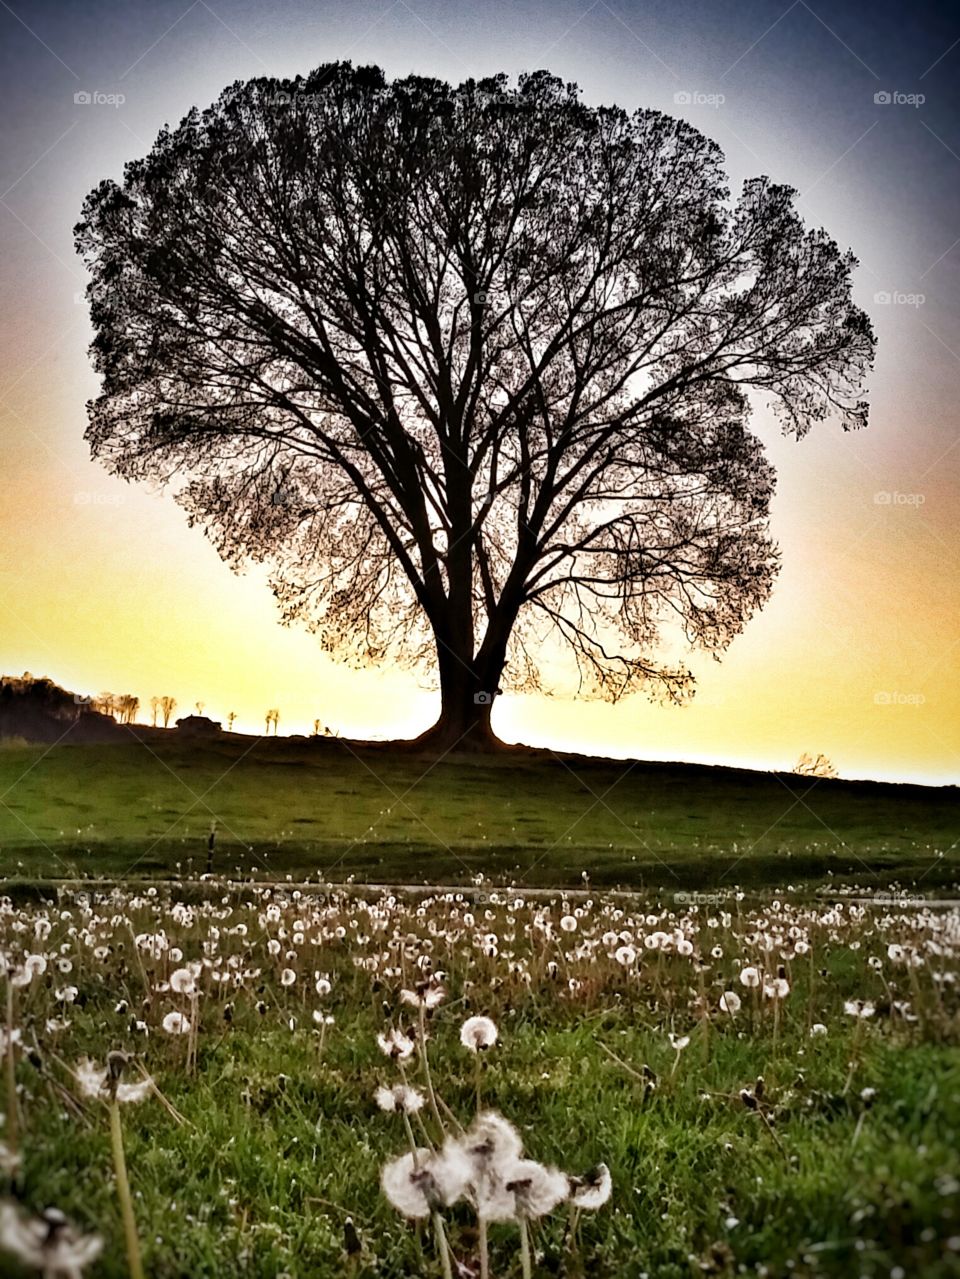 The Tree. I love this tree... field of dandelions.